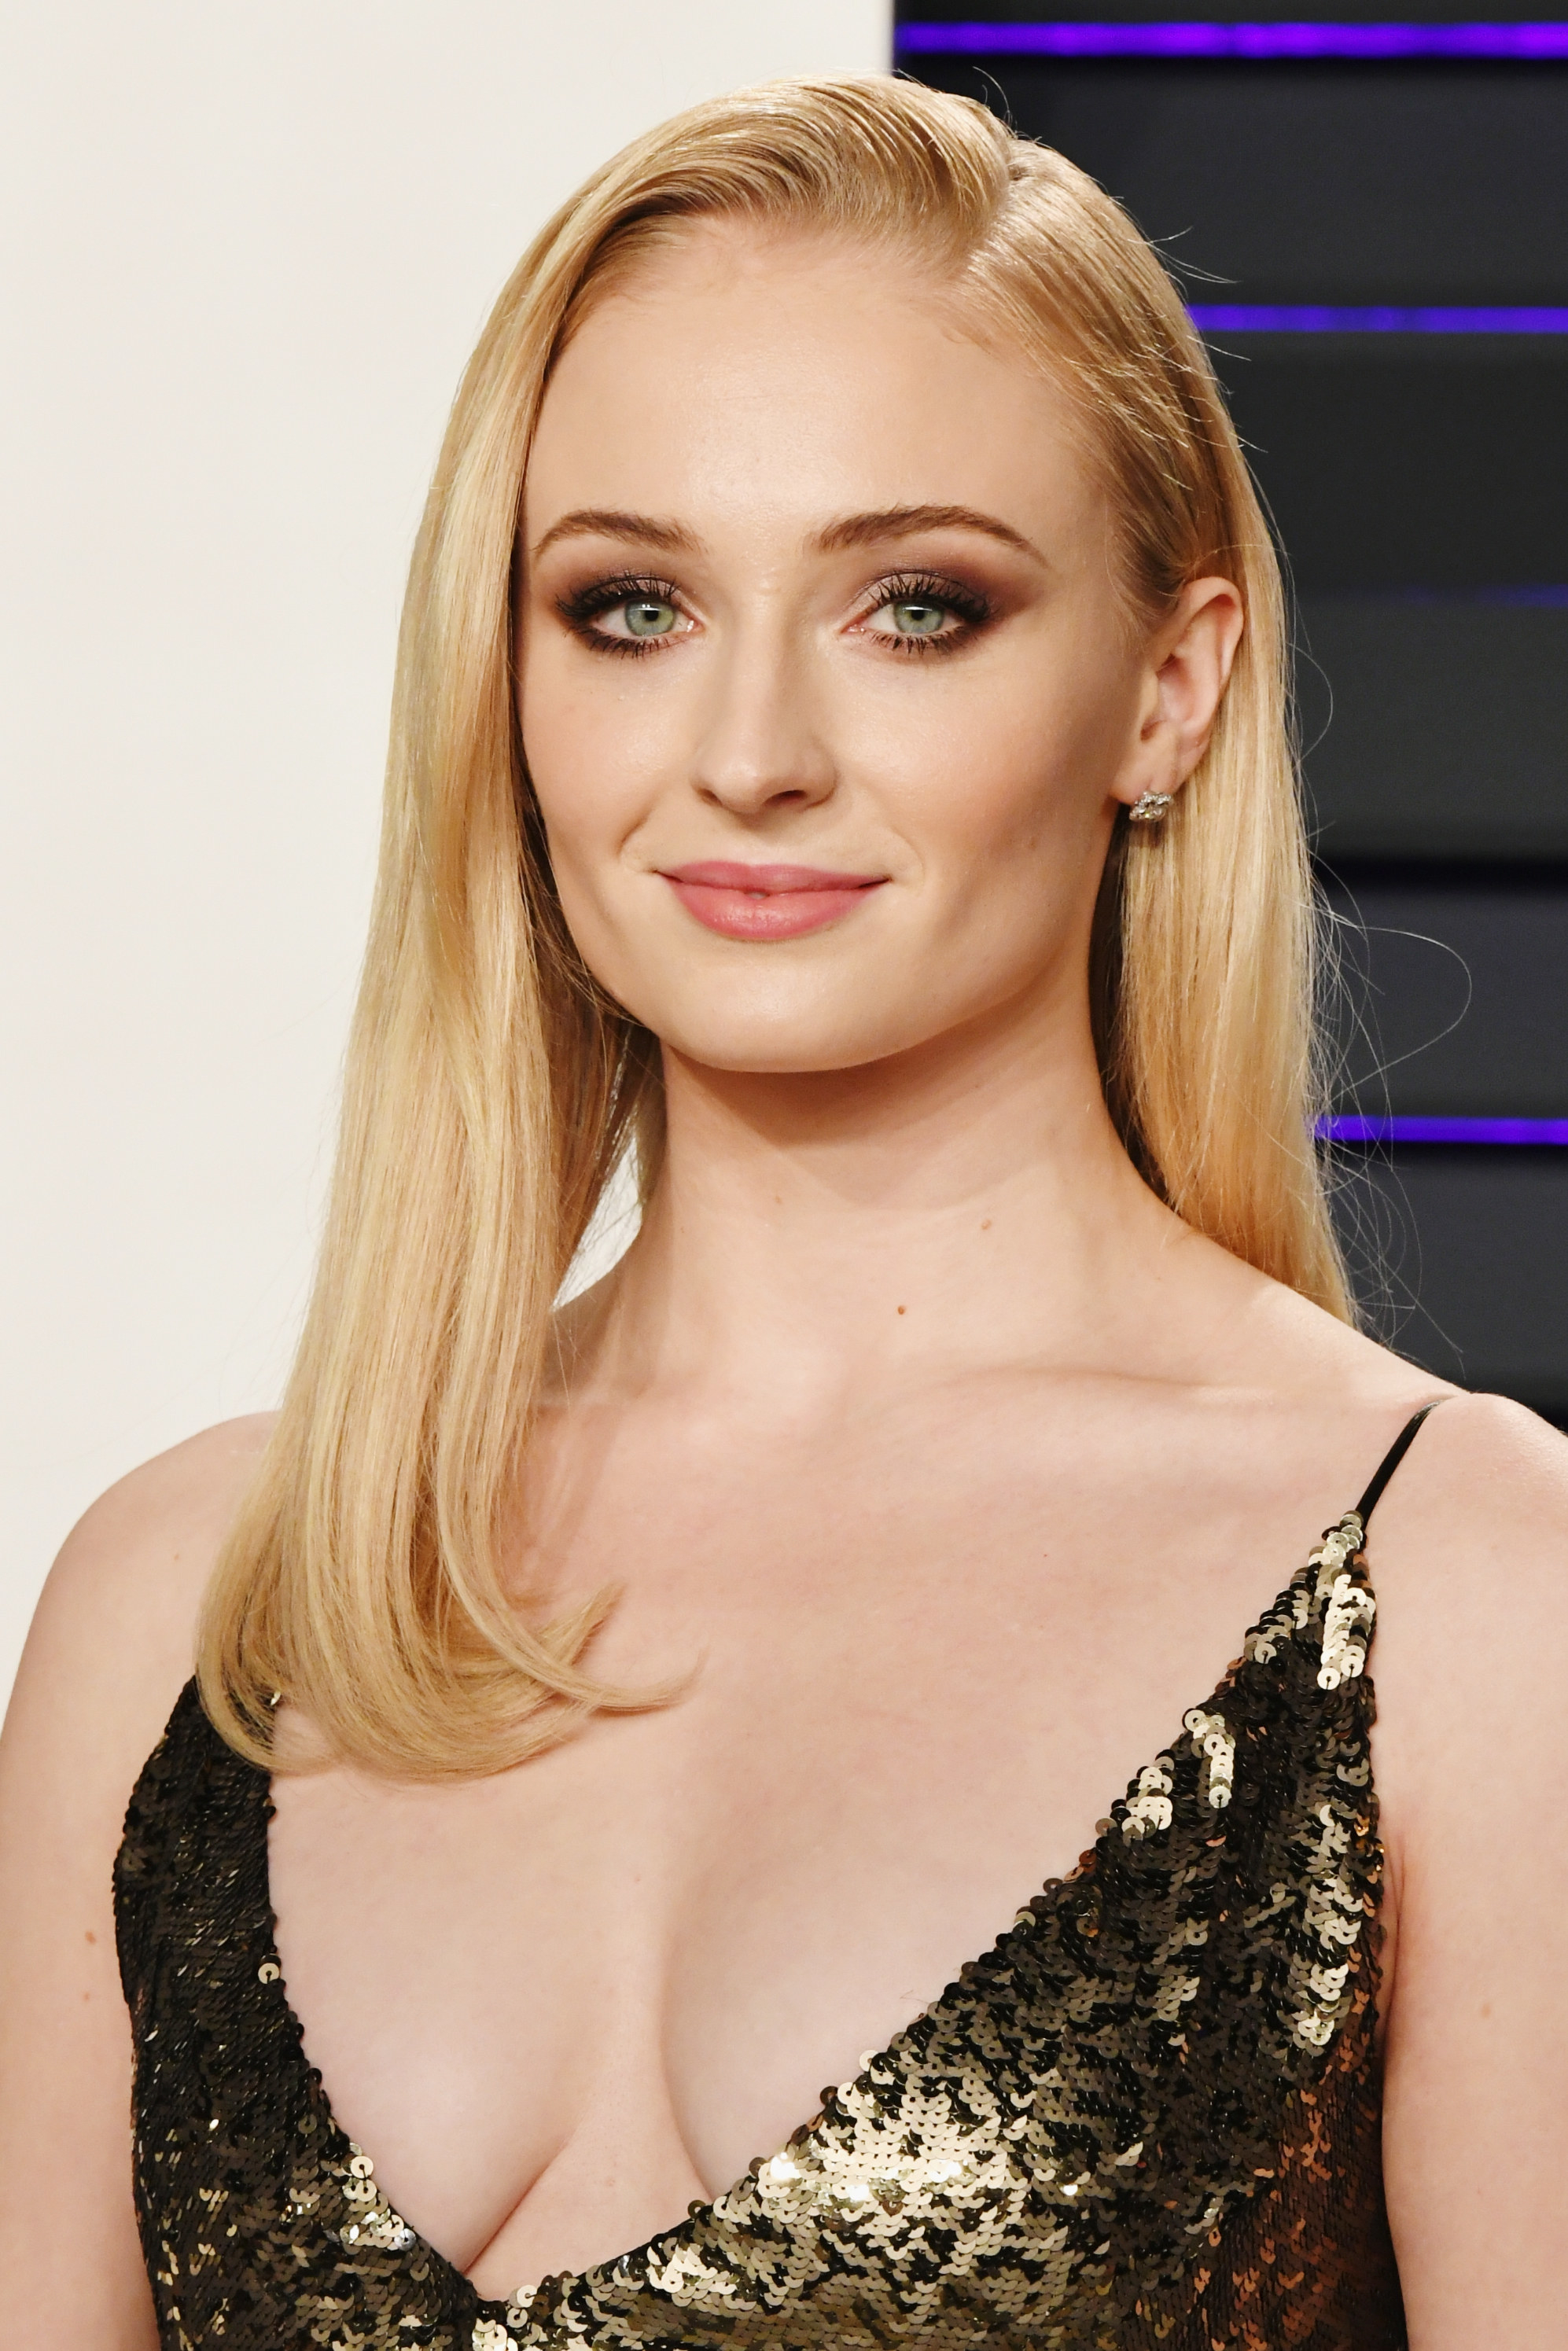  Sophie Turner attends the 2019 Vanity Fair Oscar Party